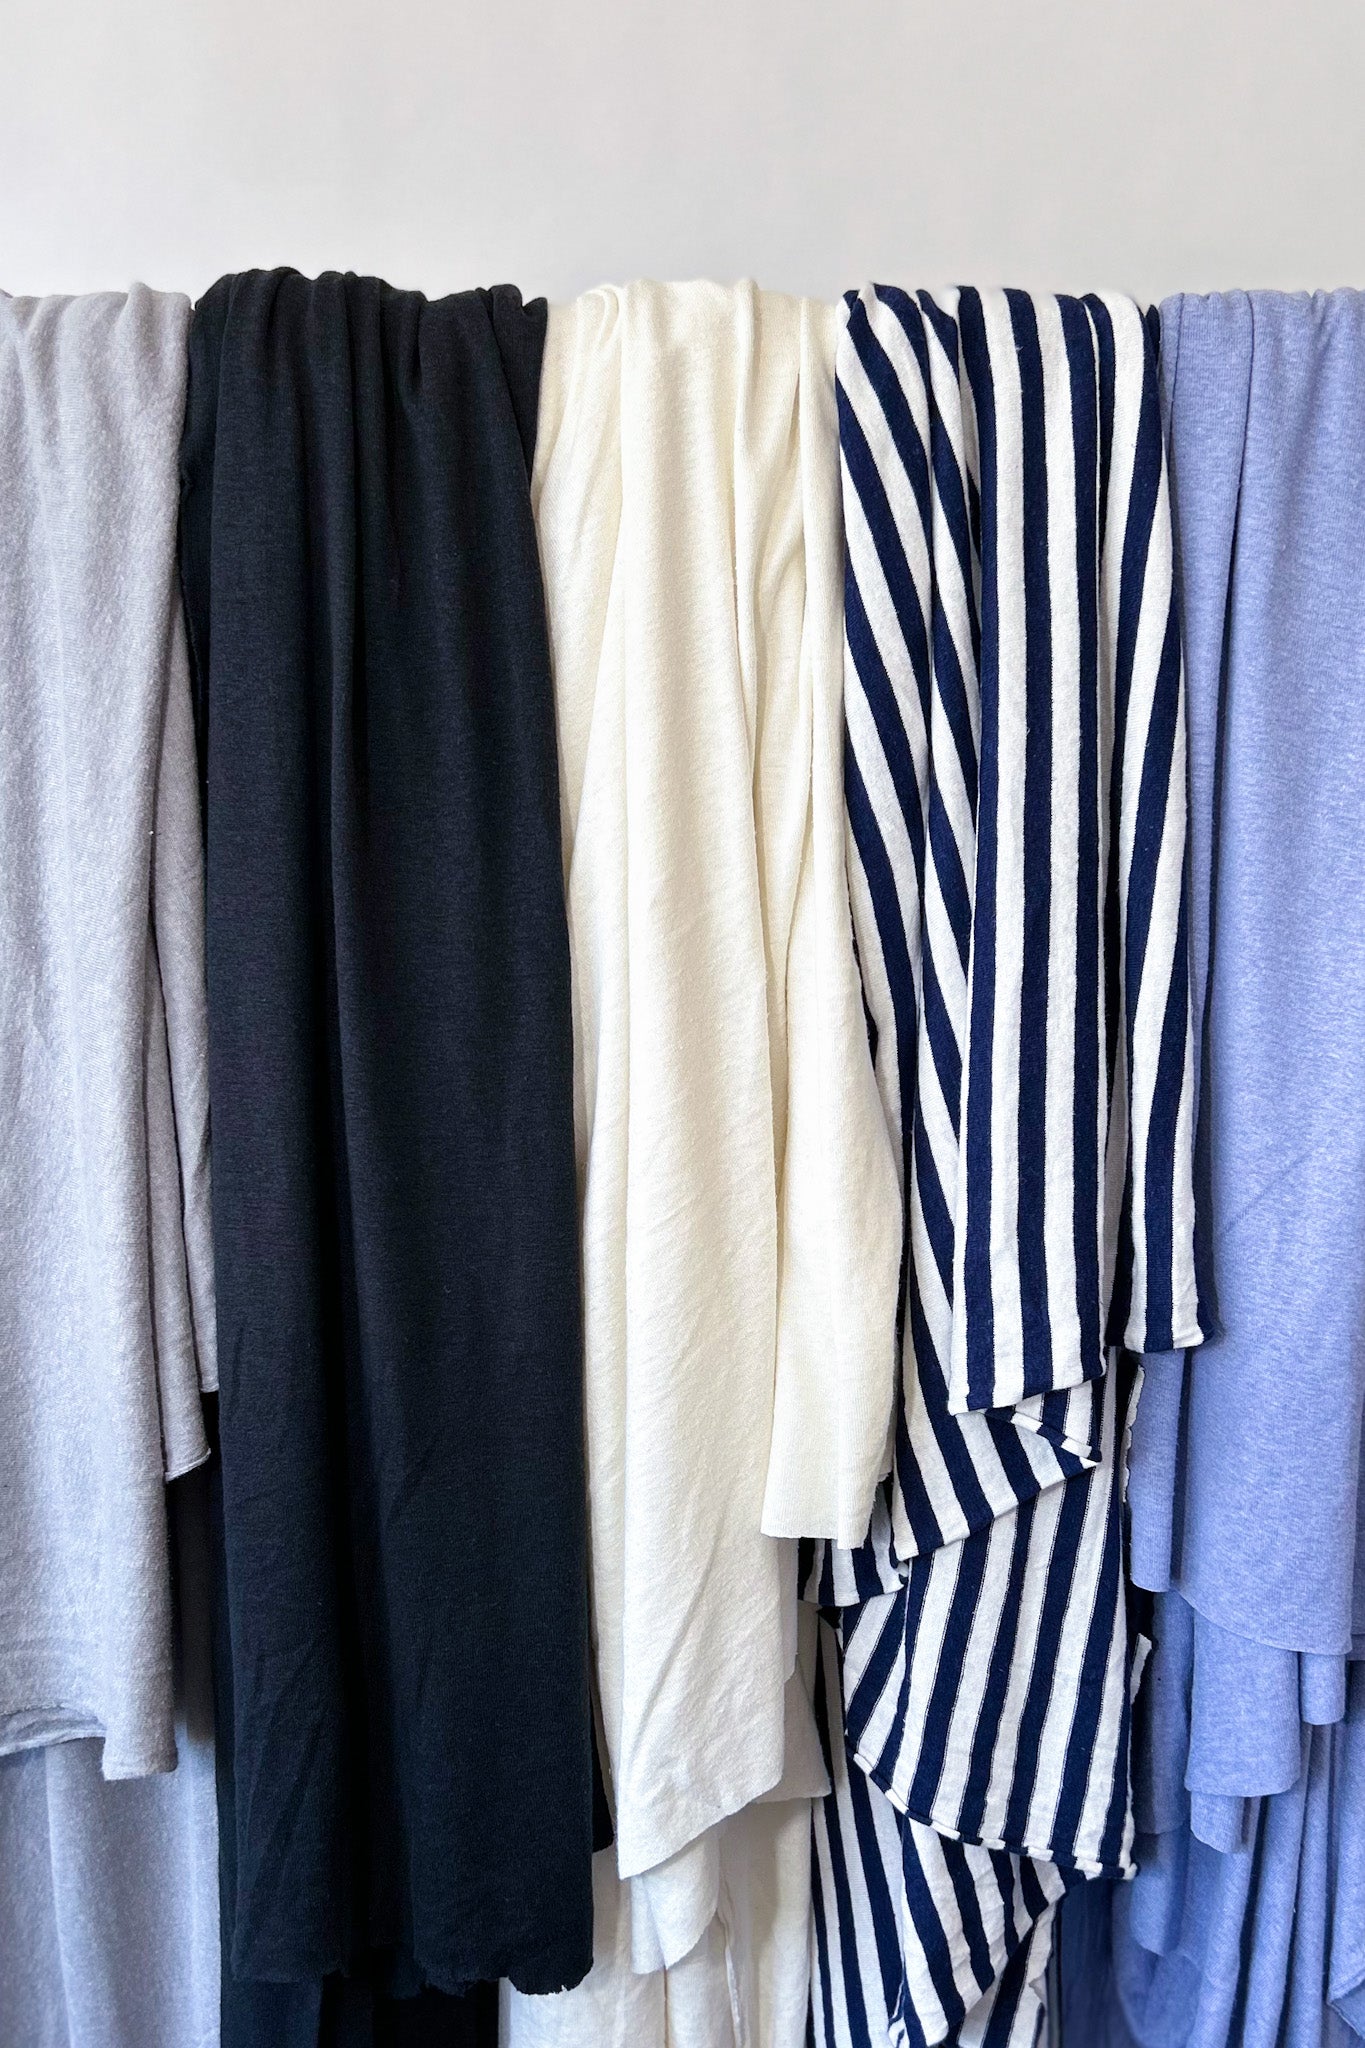 Row of hemp jersey fabrics hanging on rail in grey, black, natural white, navy/white stripe and periwinkle blue